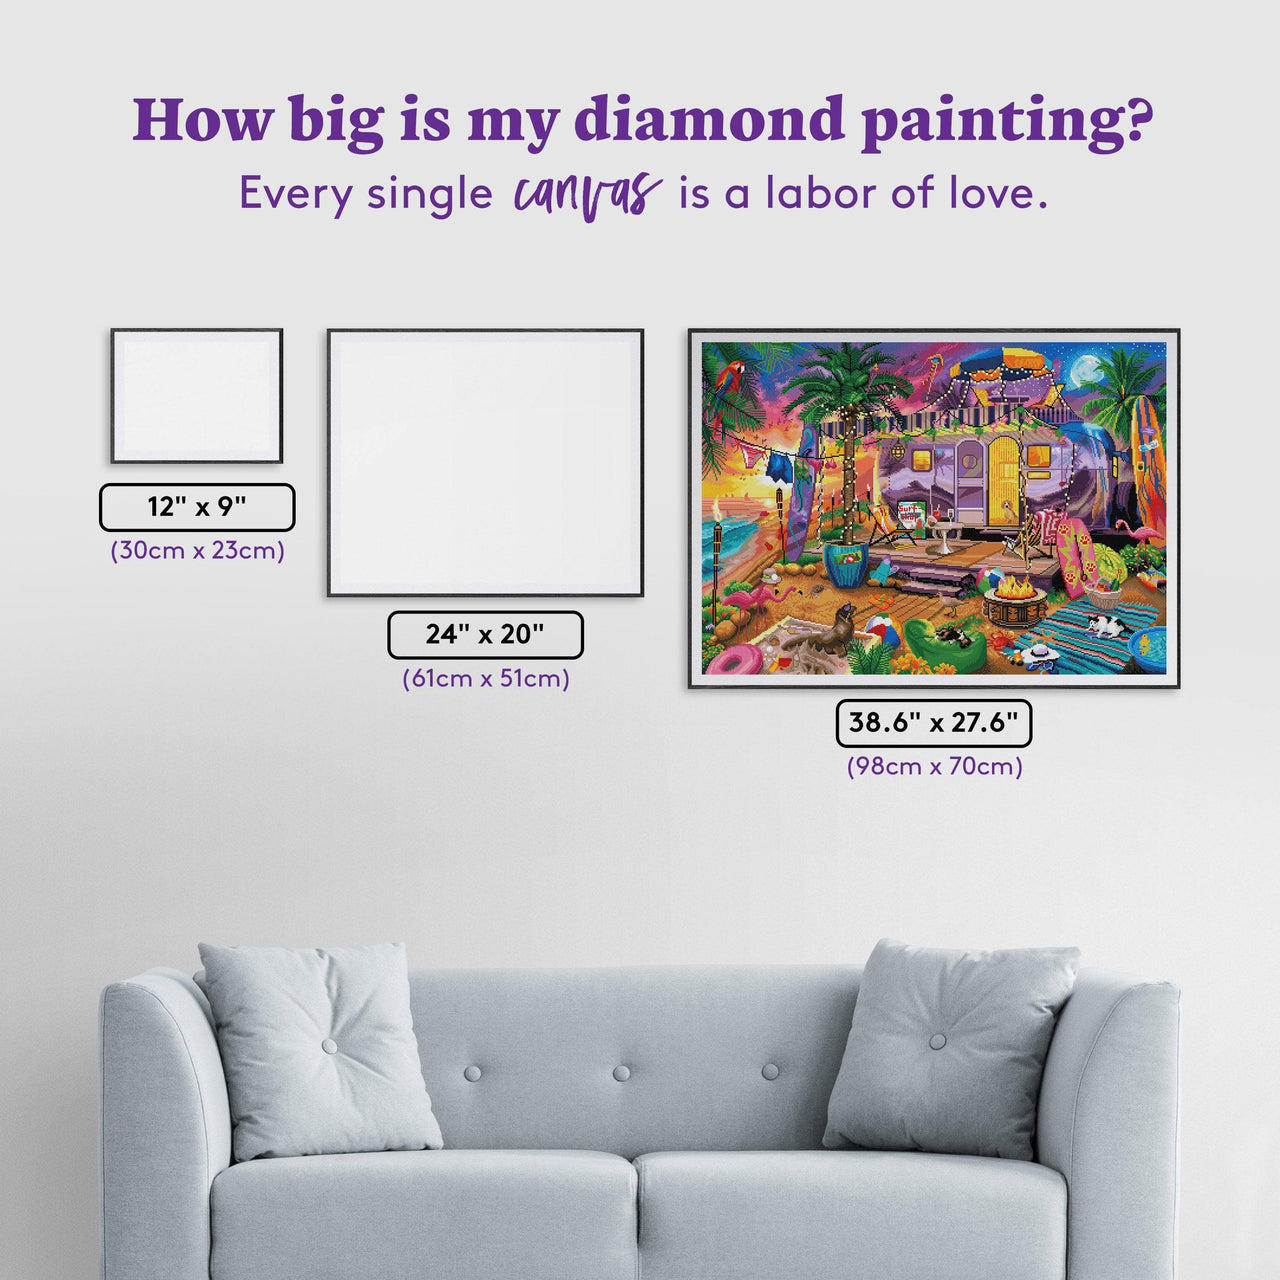 Diamond Painting Beach Vacation 38.6" x 27.6" (98cm x 70cm) / Square with 74 Colors including 3 ABs and 1 Special Diamonds / 109,757